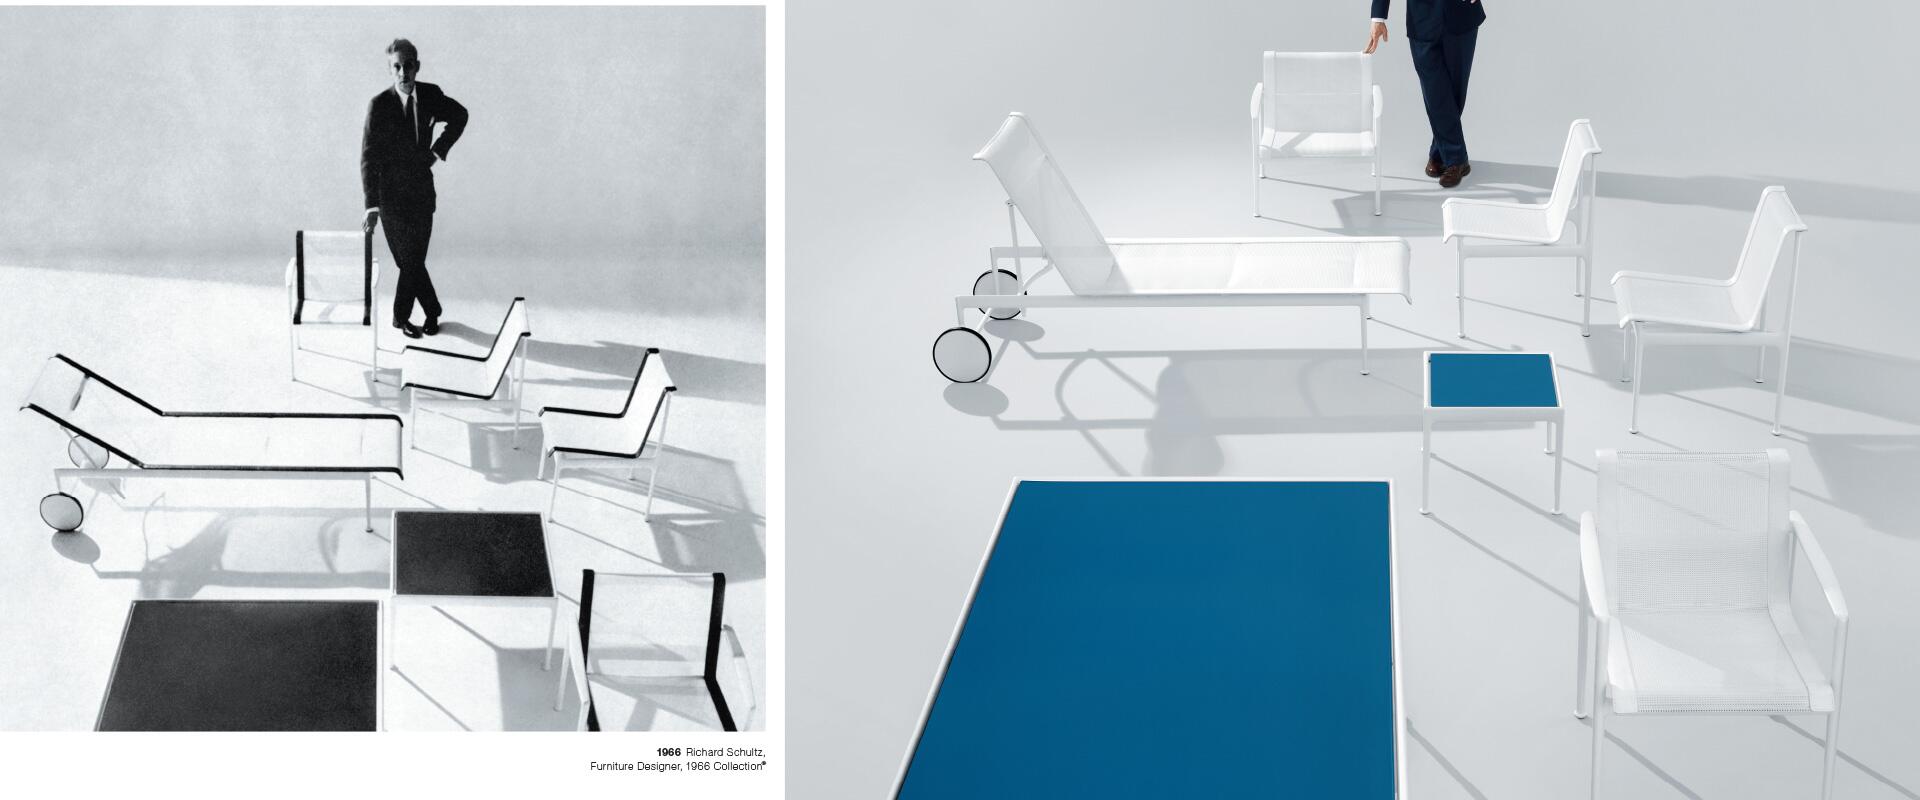 16C-105_Modern always: Knoll 75th Anniversary (with Richard Schultz in 1966 and 2013)_50,000ft